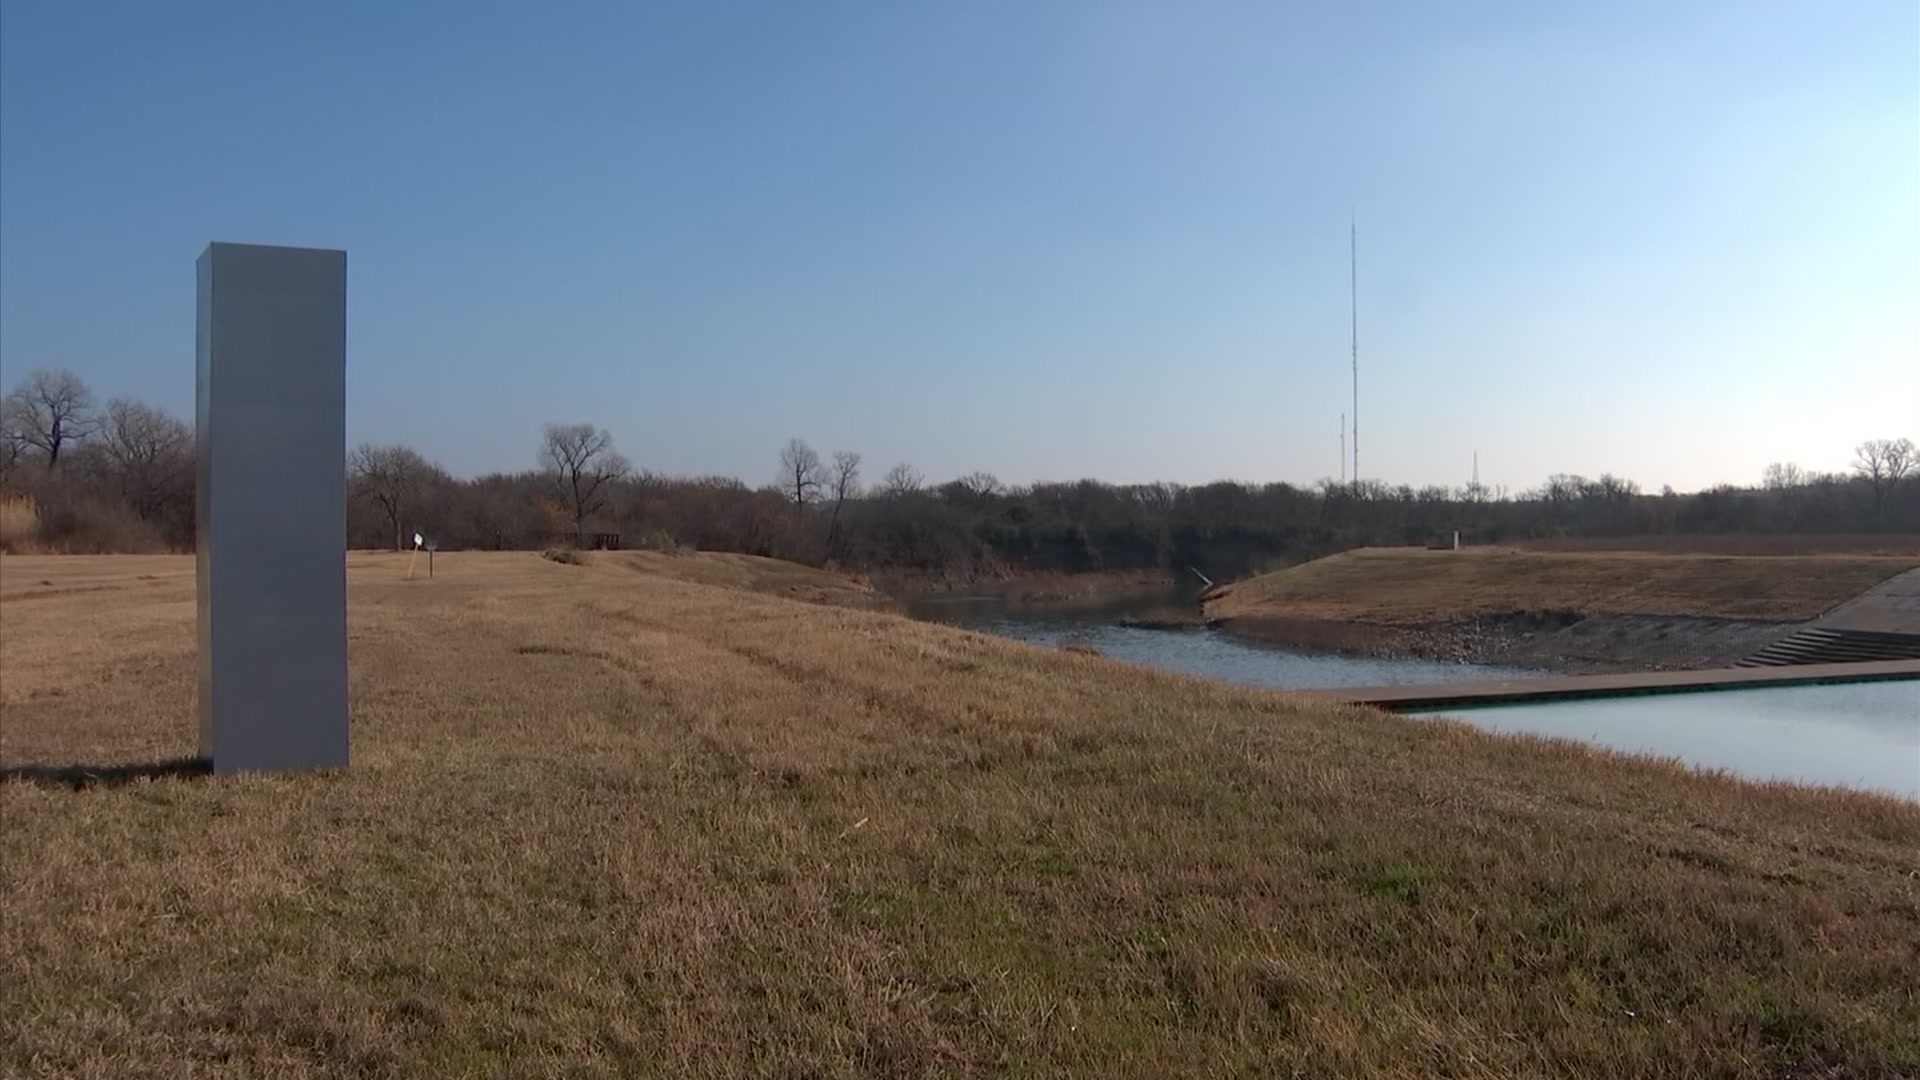 Mystery Monolith Found in Texas